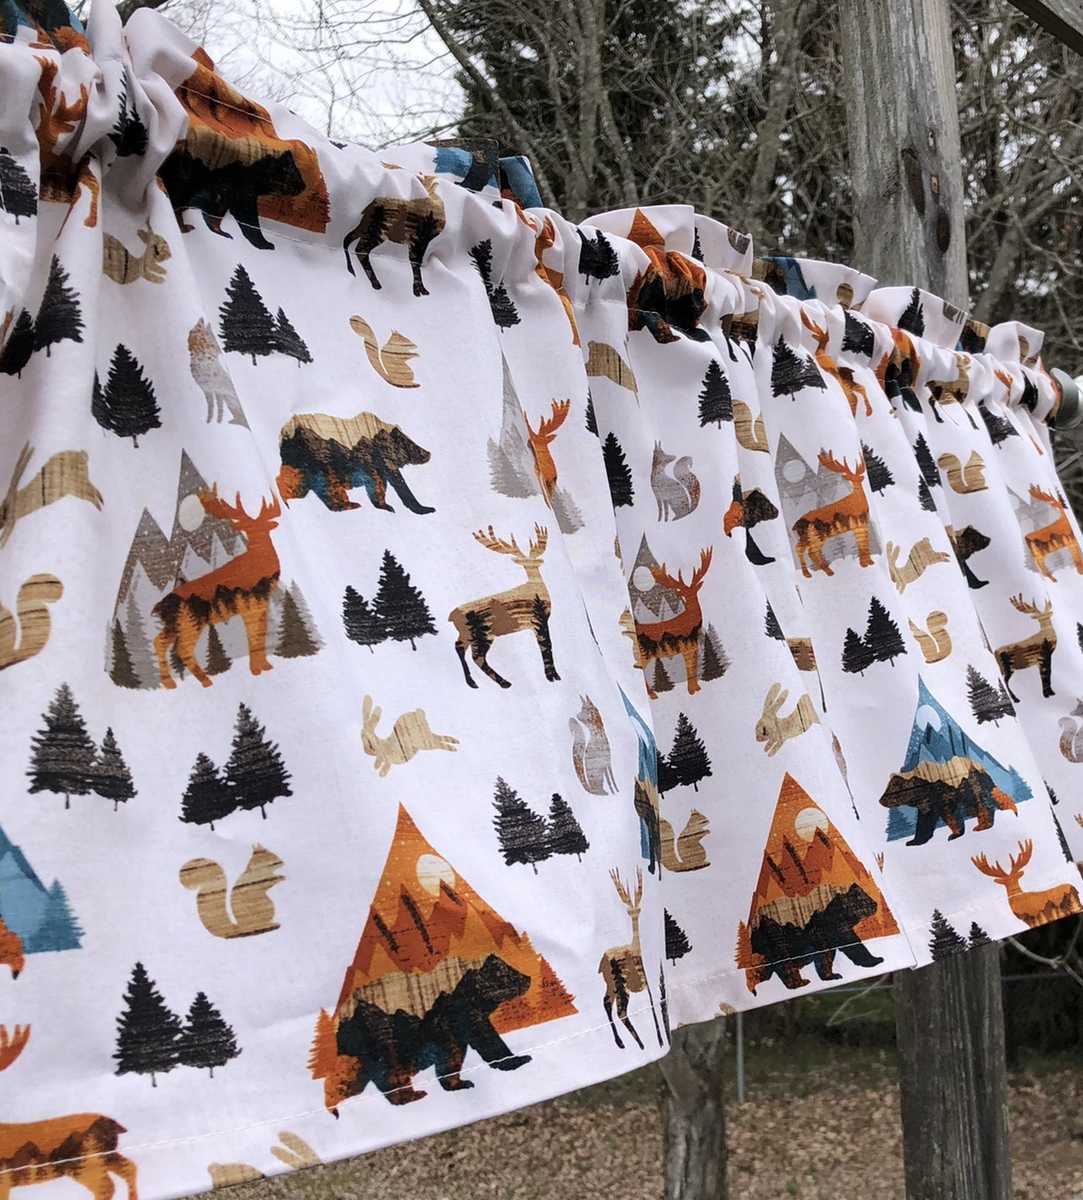 Sunset Animal Woodland Valance Bear Deer Squirrel Rabbit Trees Mountains Cabin Lodge Decor Handcrafted Curtain Valance or Pillow Cover t4/33